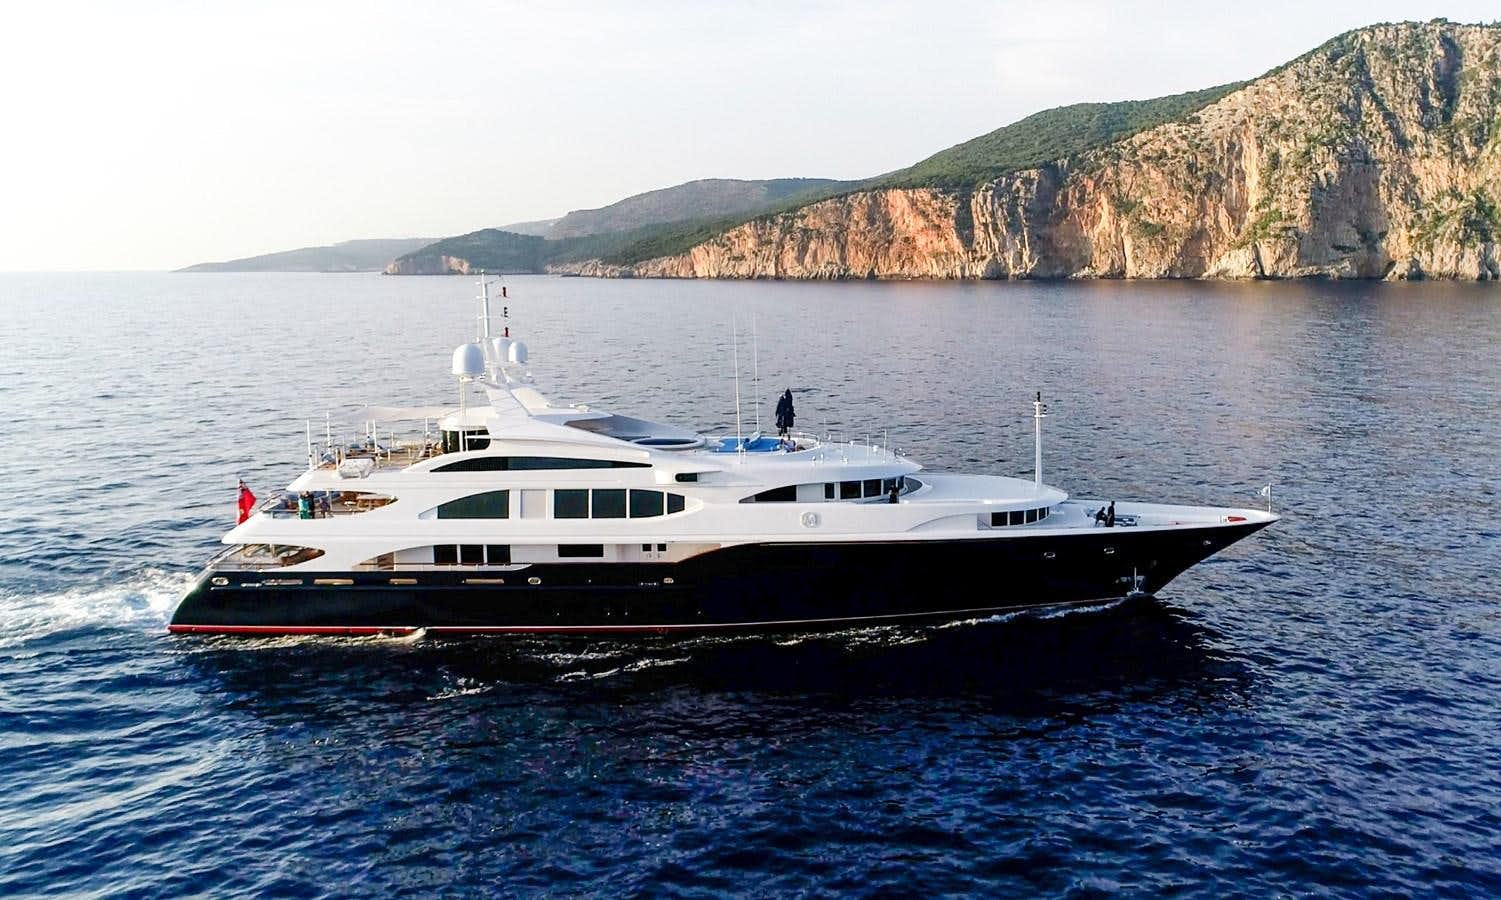 Next chapter
Yacht for Sale